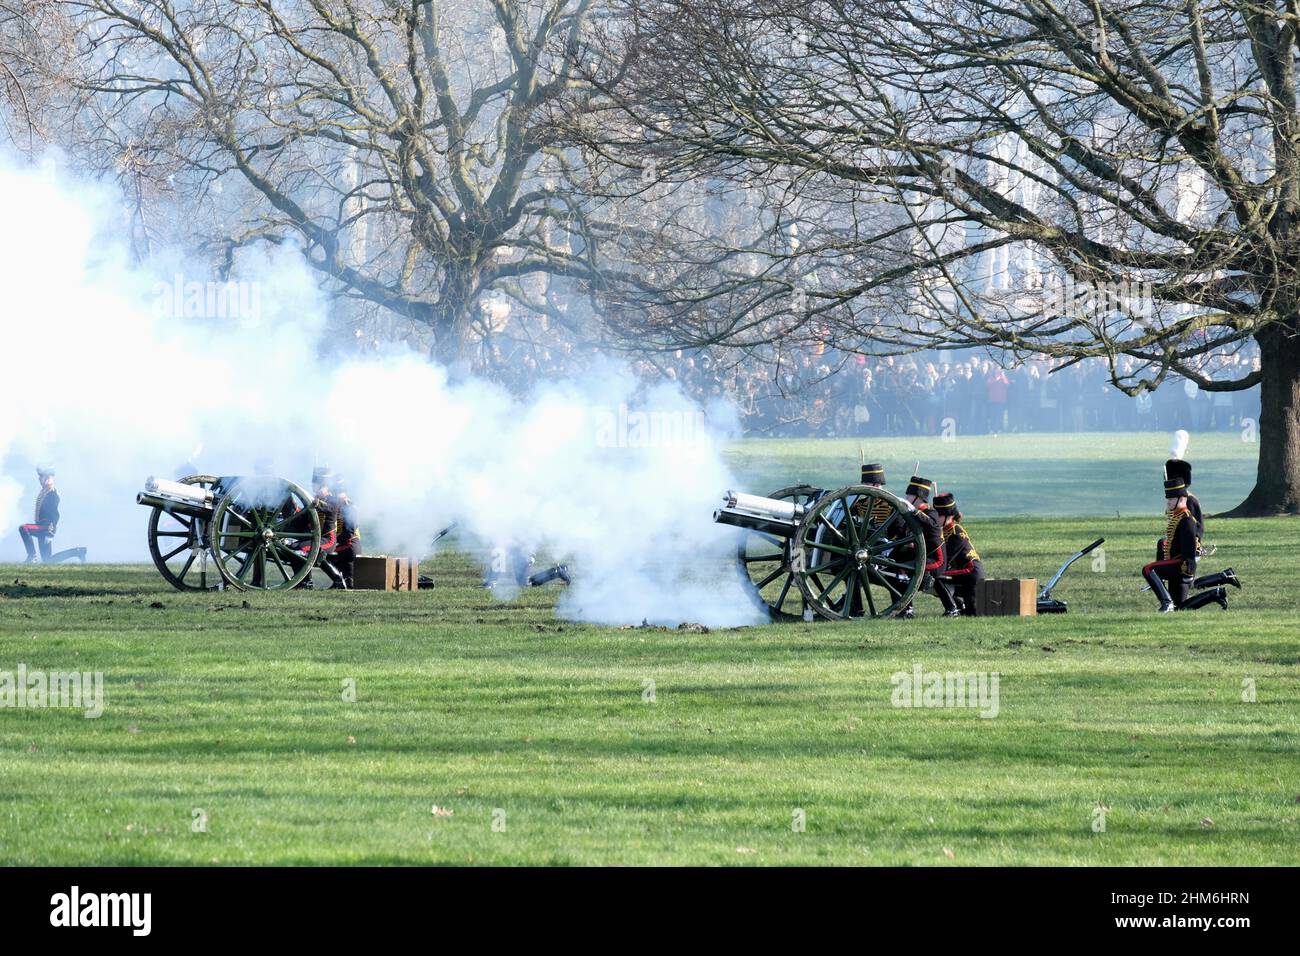 The King's Troop Royal Horse Artillery fires 41 rounds in Green Park, London, marking the start of celebrations for the Queen's Platinum Jubilee. Stock Photo